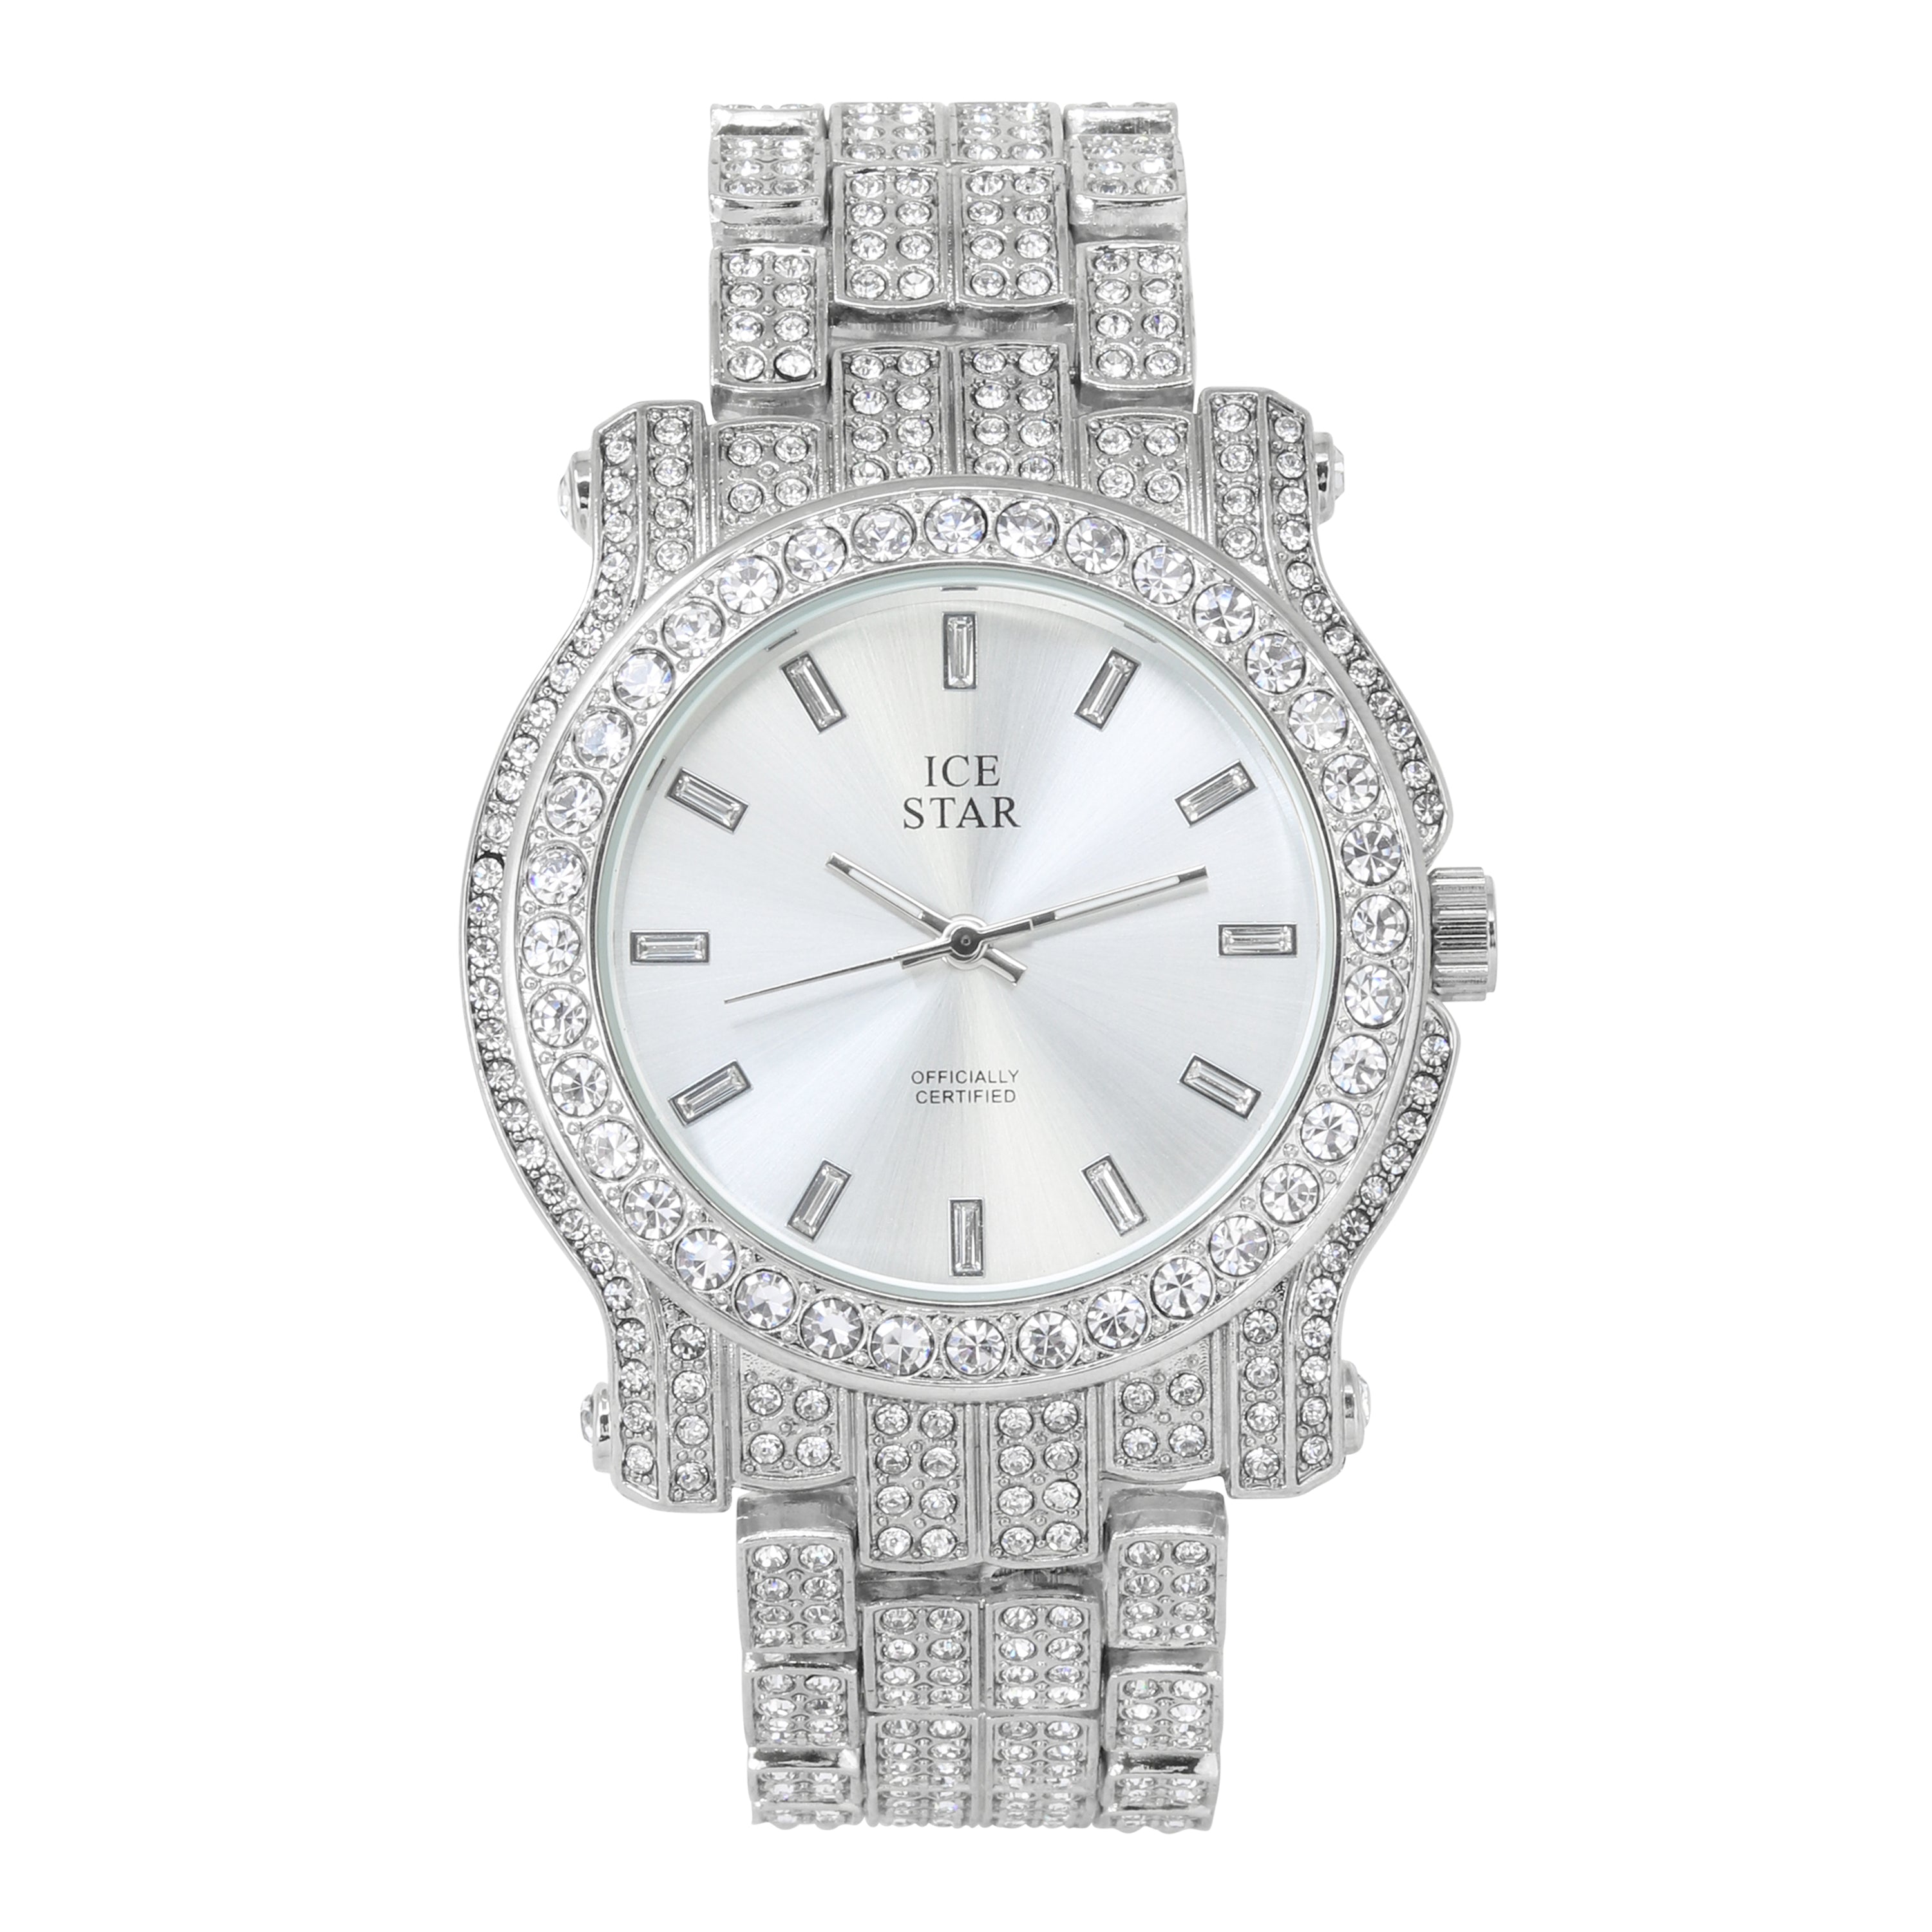 Women's Round Iced Out Watch 45mm Silver - Baguette Dial